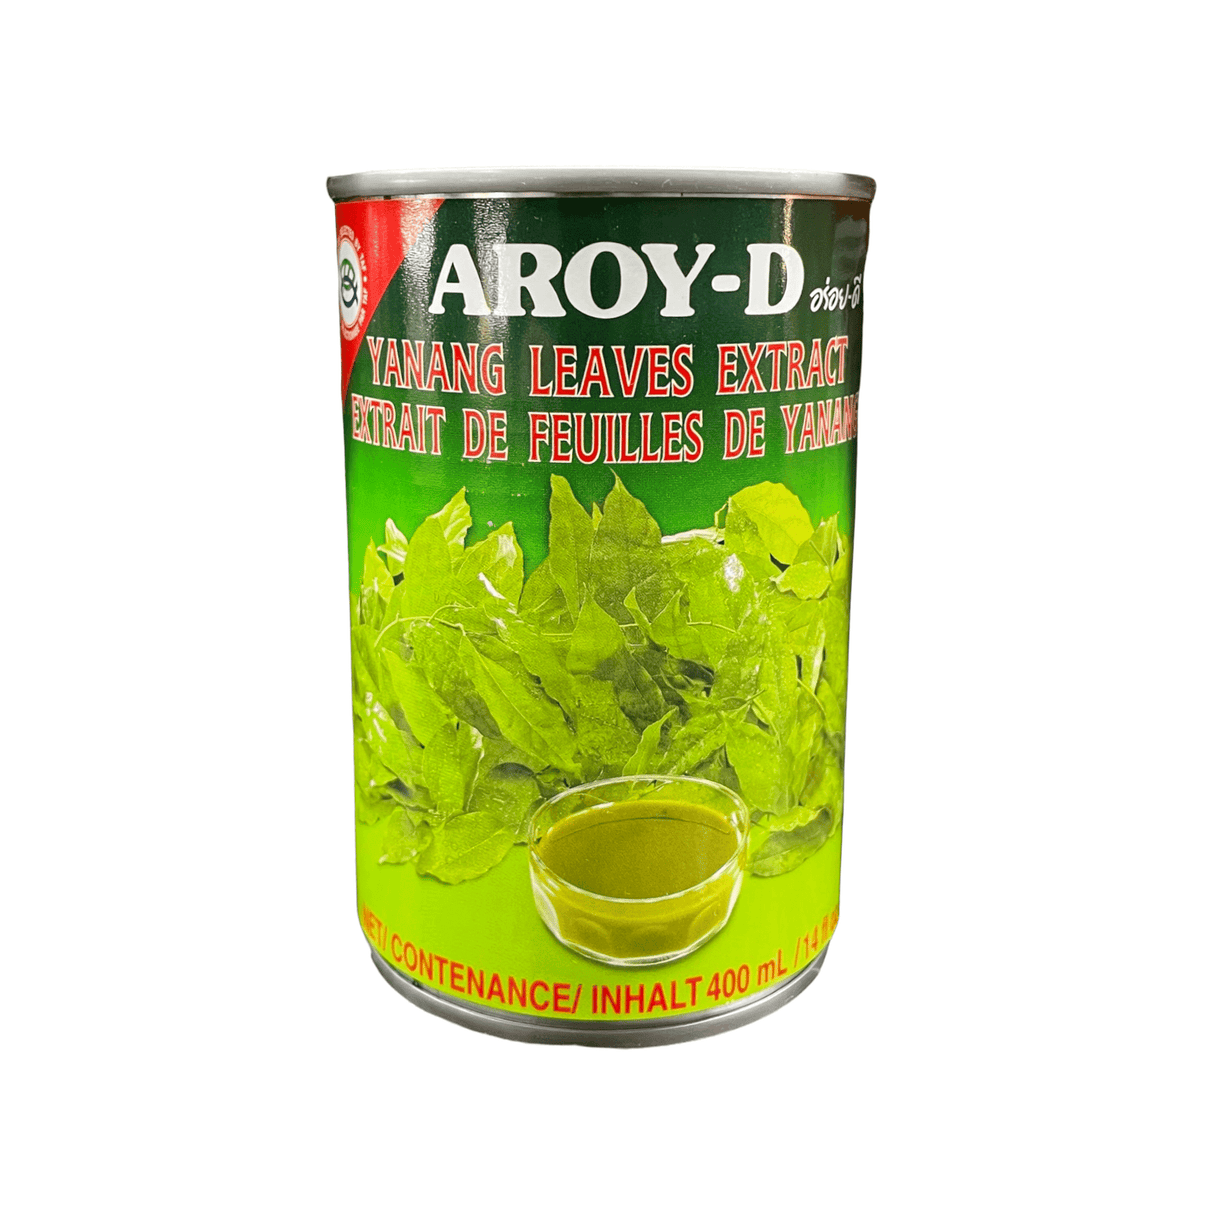 Aroy-d Yanang Leaves Extract